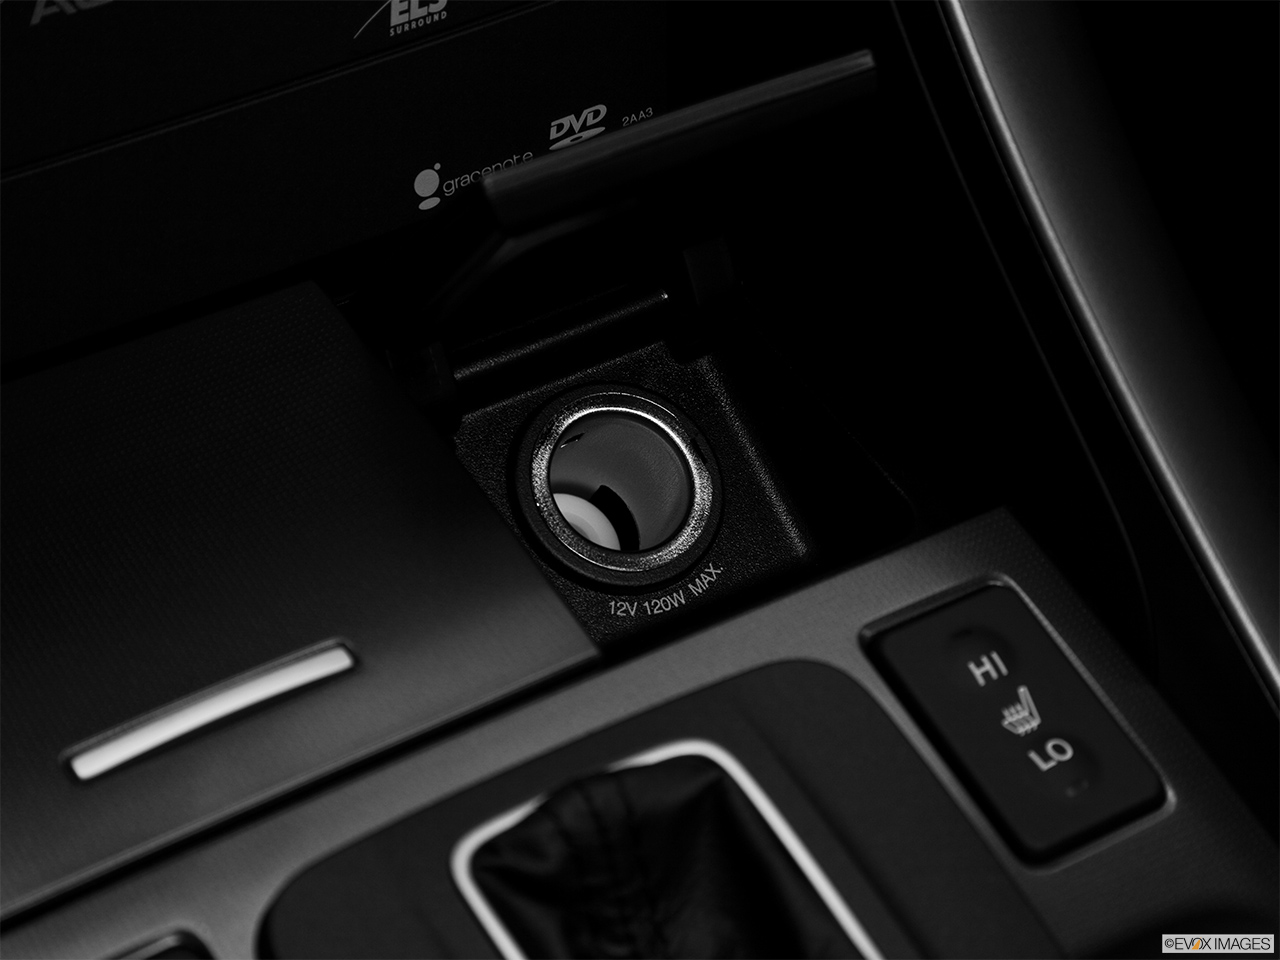 2012 Acura TSX 5-Speed Automatic Main power point. 